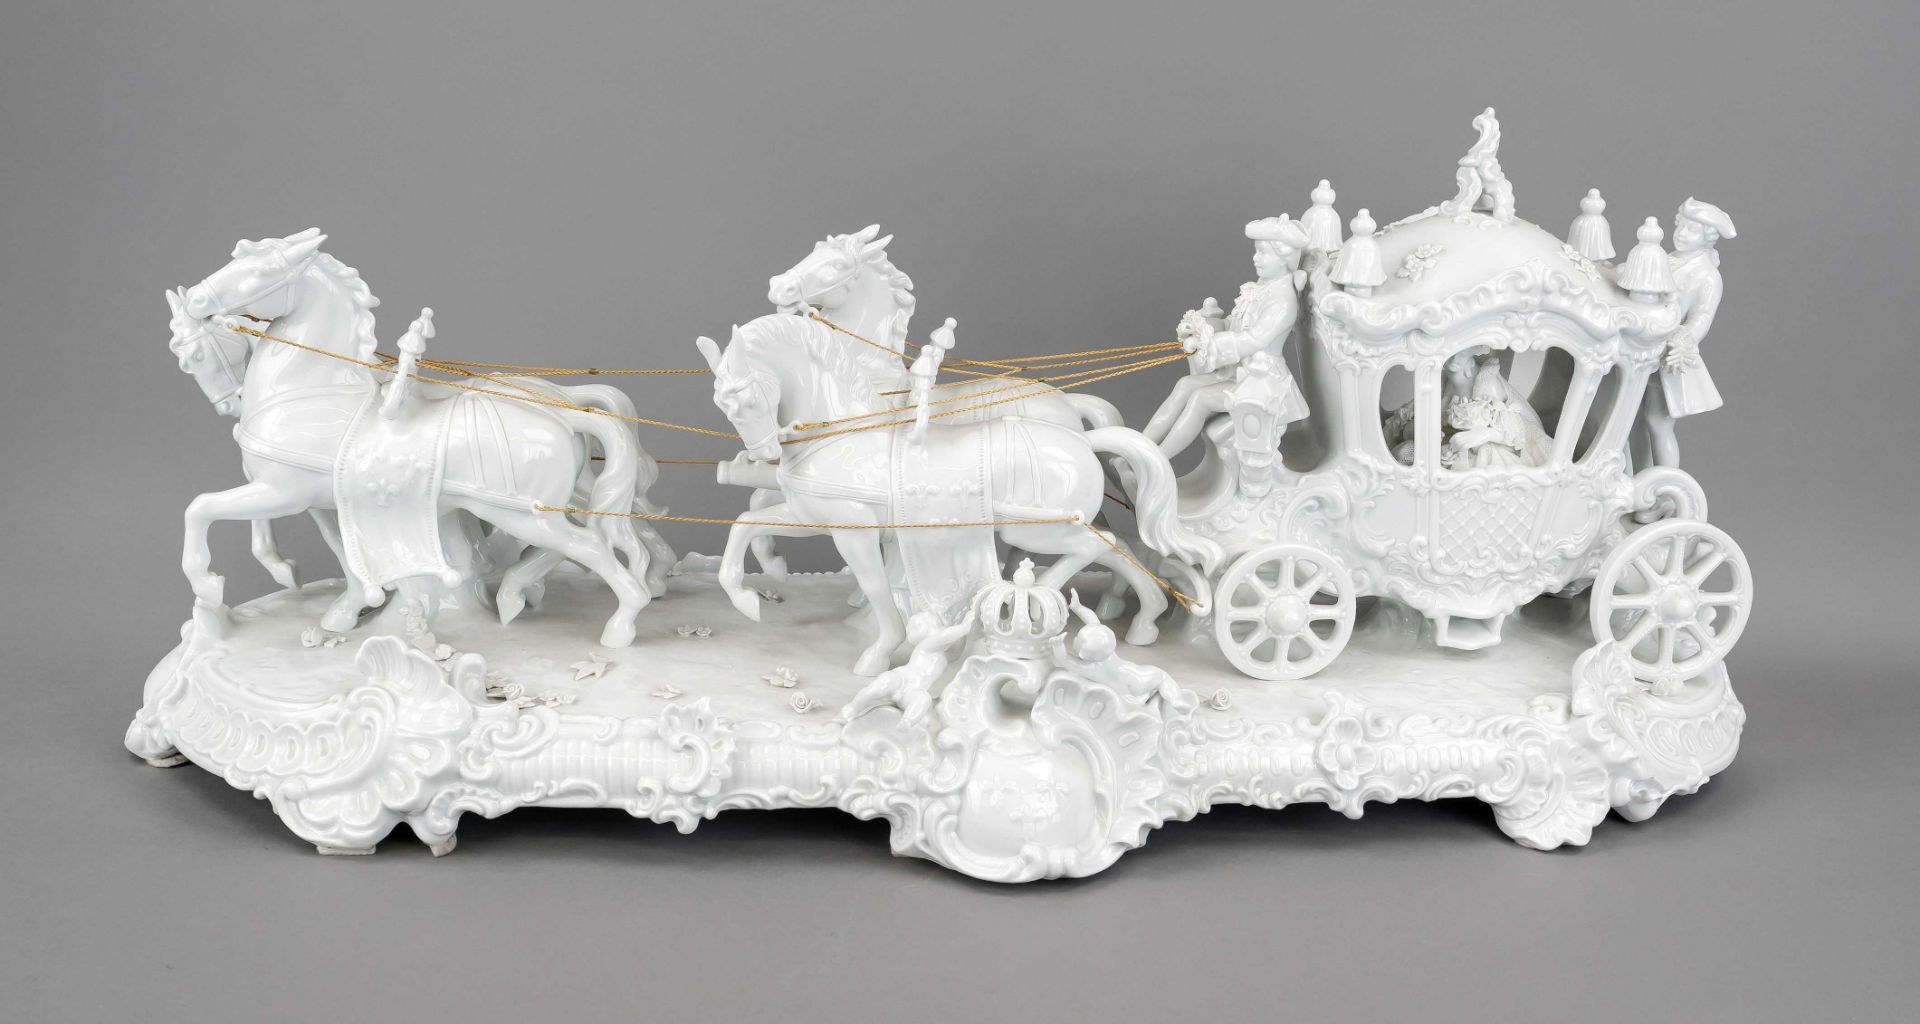 Imposing rococo carriage, Unterweißbach, Thuringia, mark after 1990, 3rd choice, white, designed